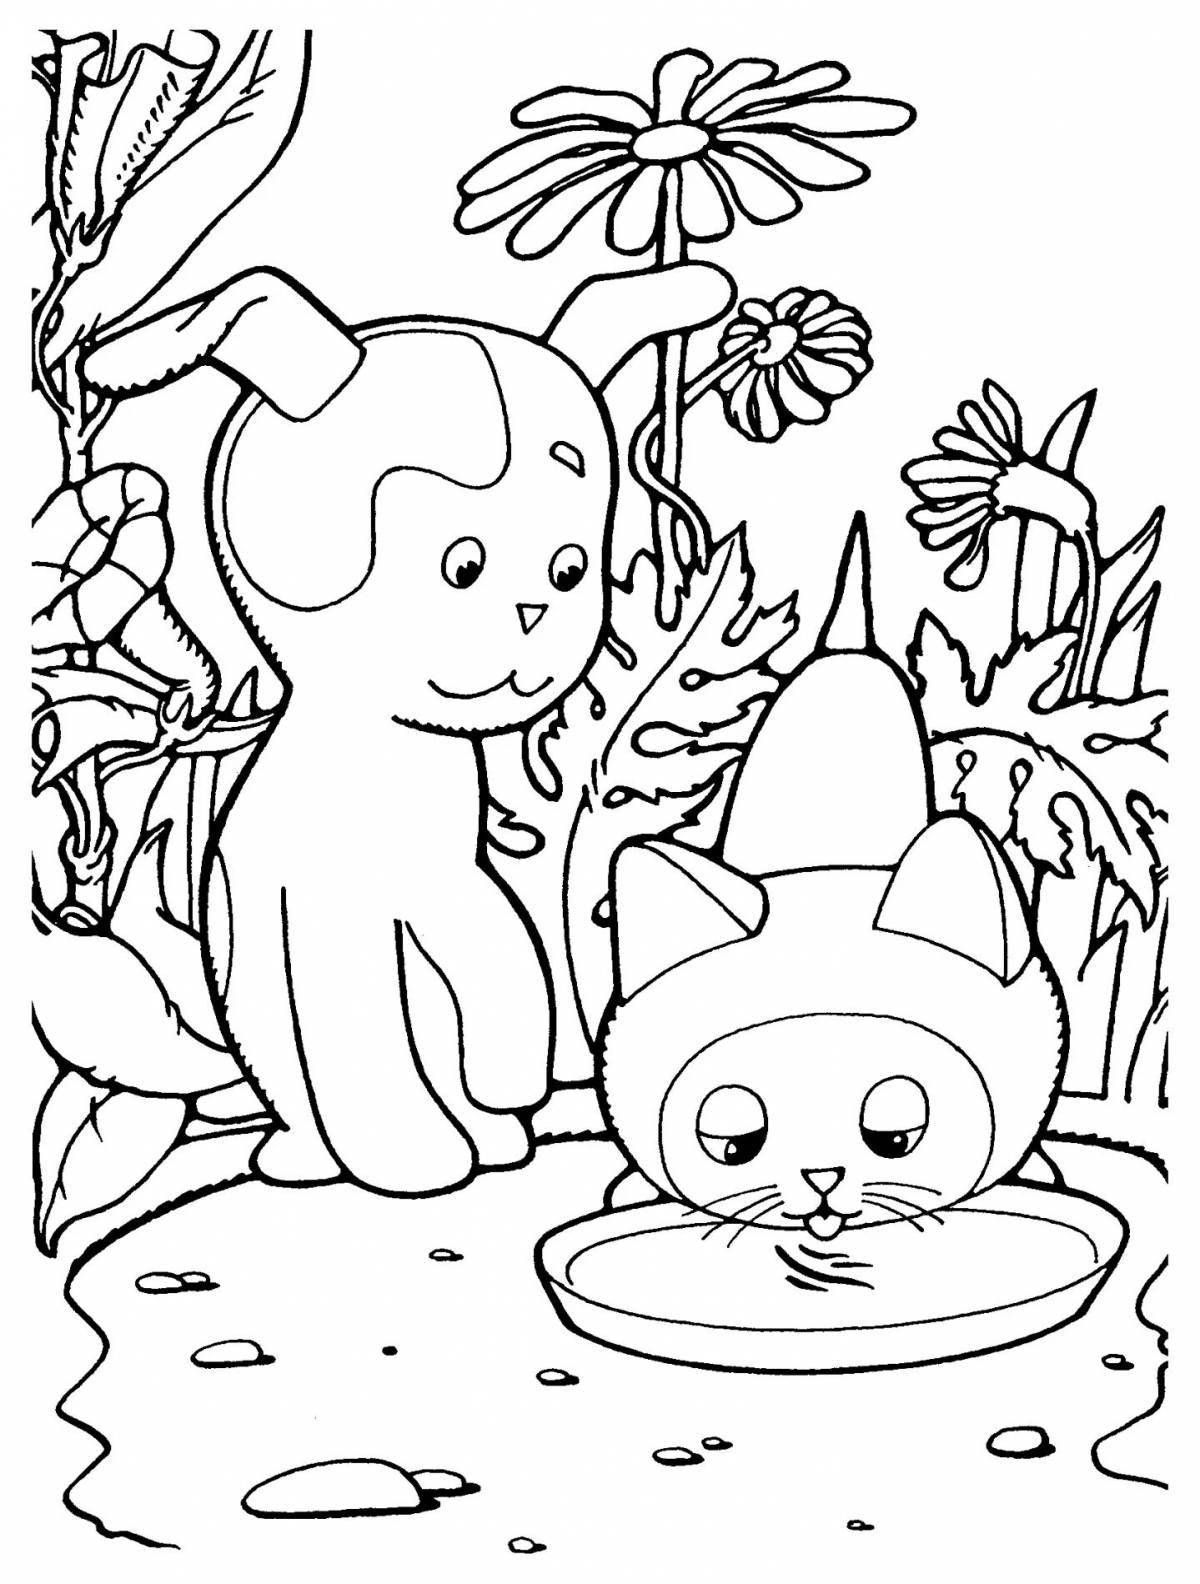 Dazzling cartoon coloring book for kids